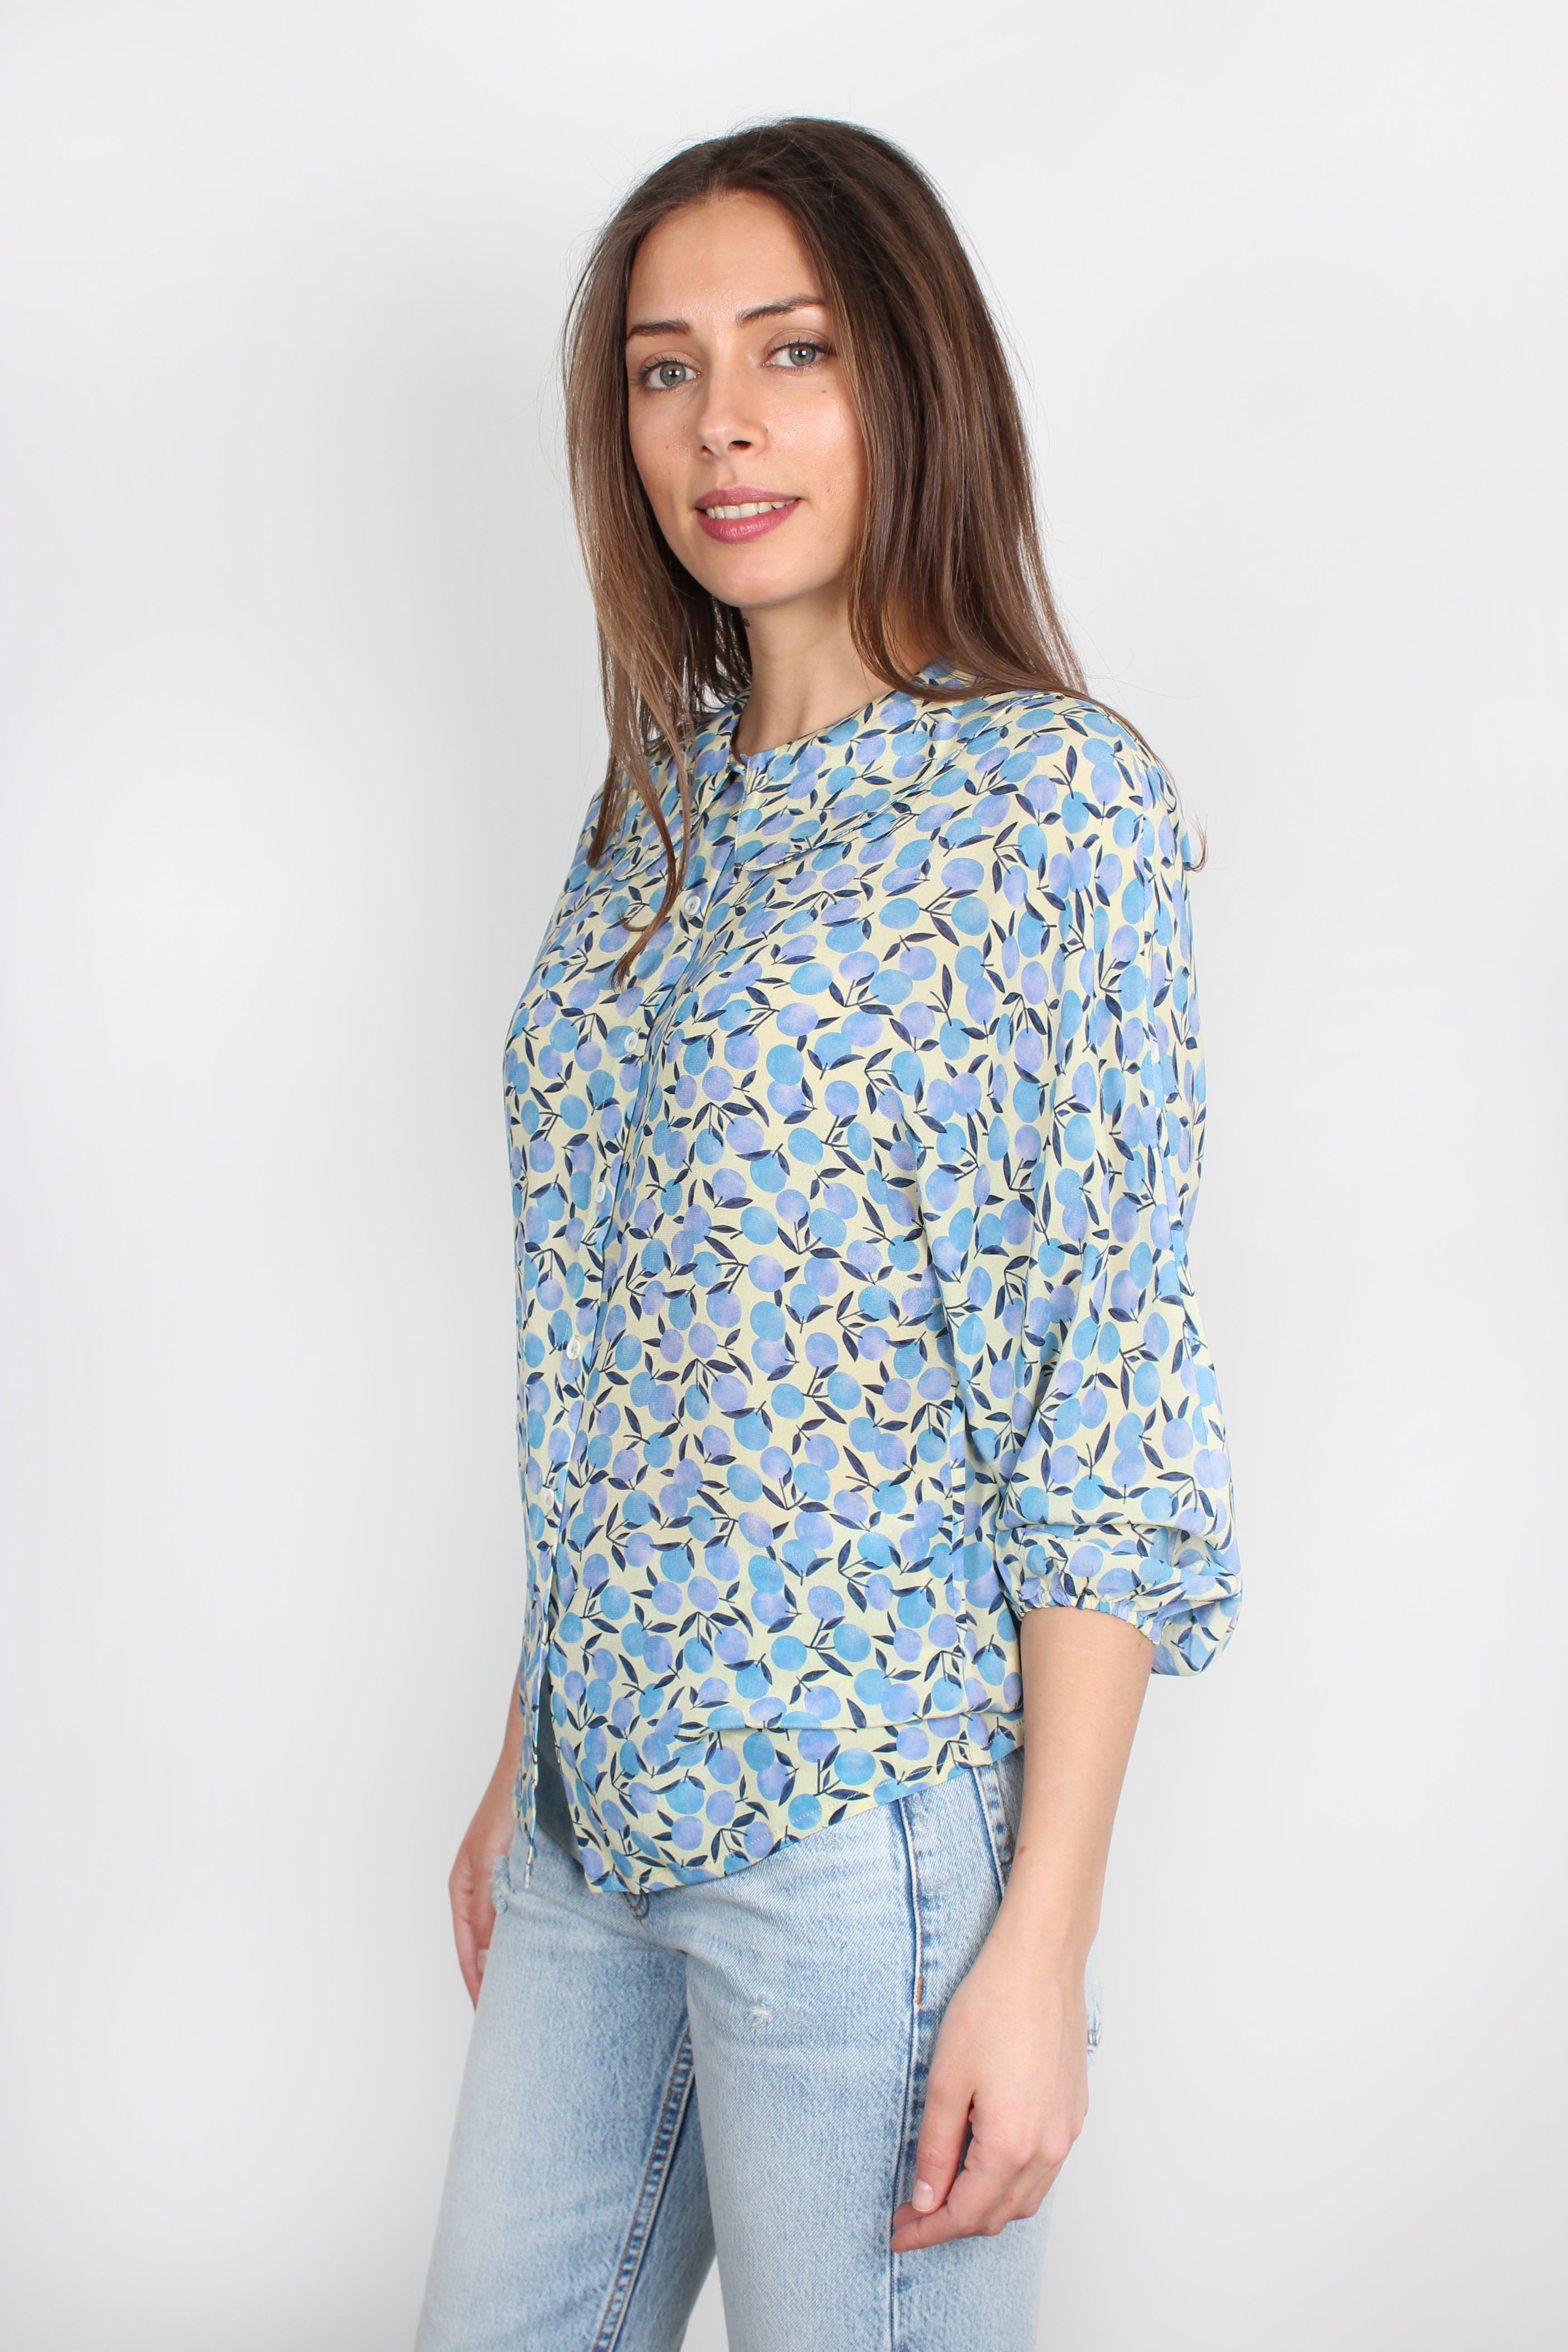 PPL Meena Shirt in Clementines 02 in Blue on Yellow